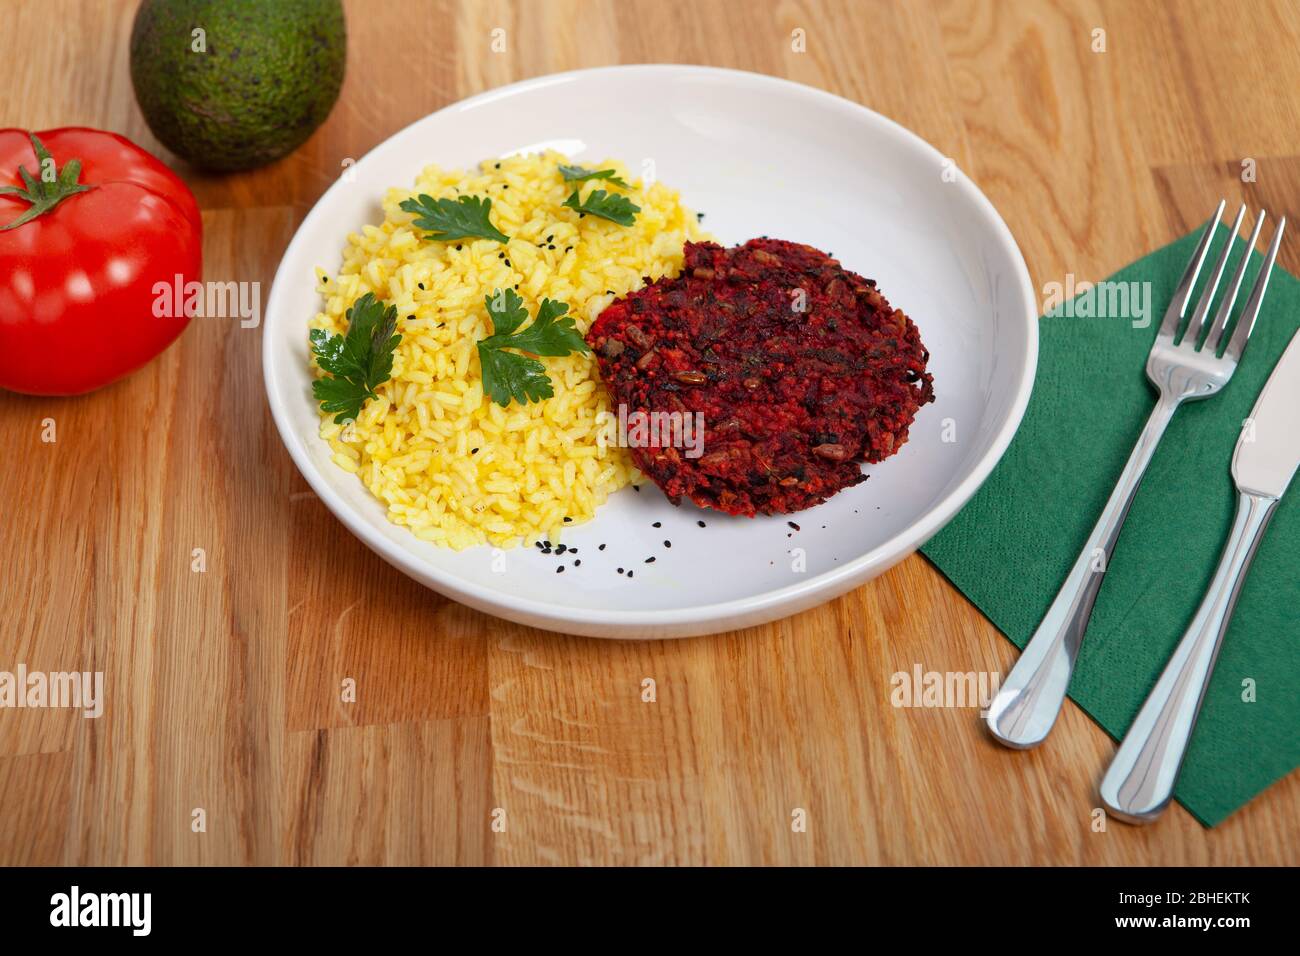 A light lunch without meat. The vegetable burger with rice and parsley. Stock Photo